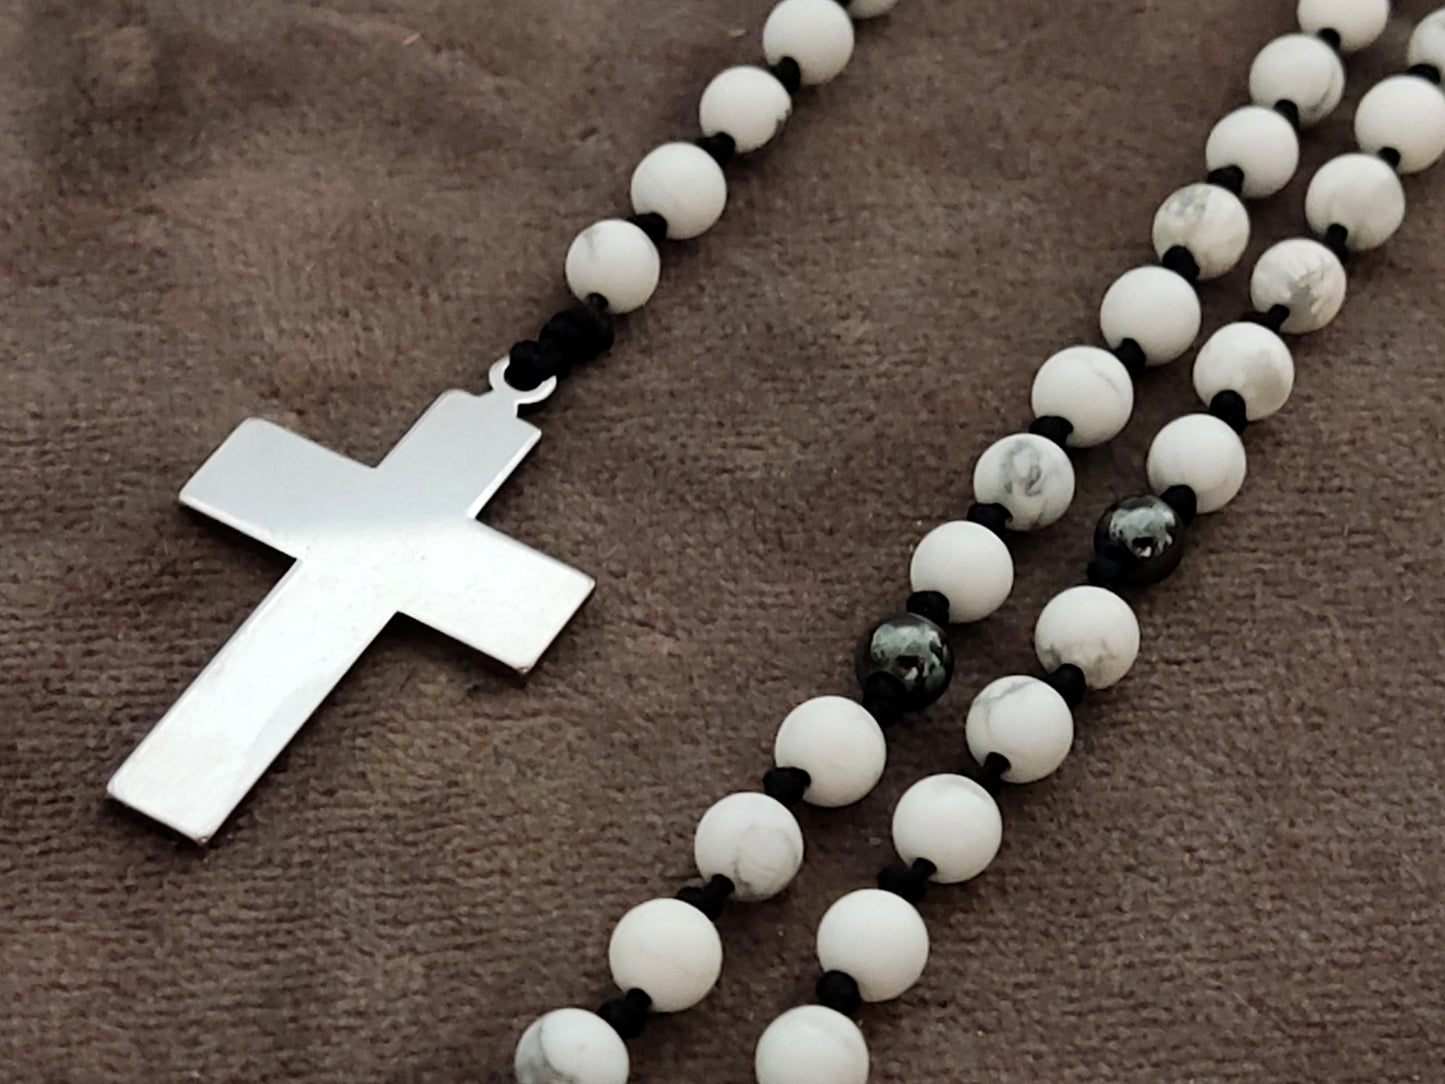 Handmade Rosary Necklace | Natural White Howlite and Hematite Stones | Stainless Steel Cross | Adjustable Length | Made in Greece